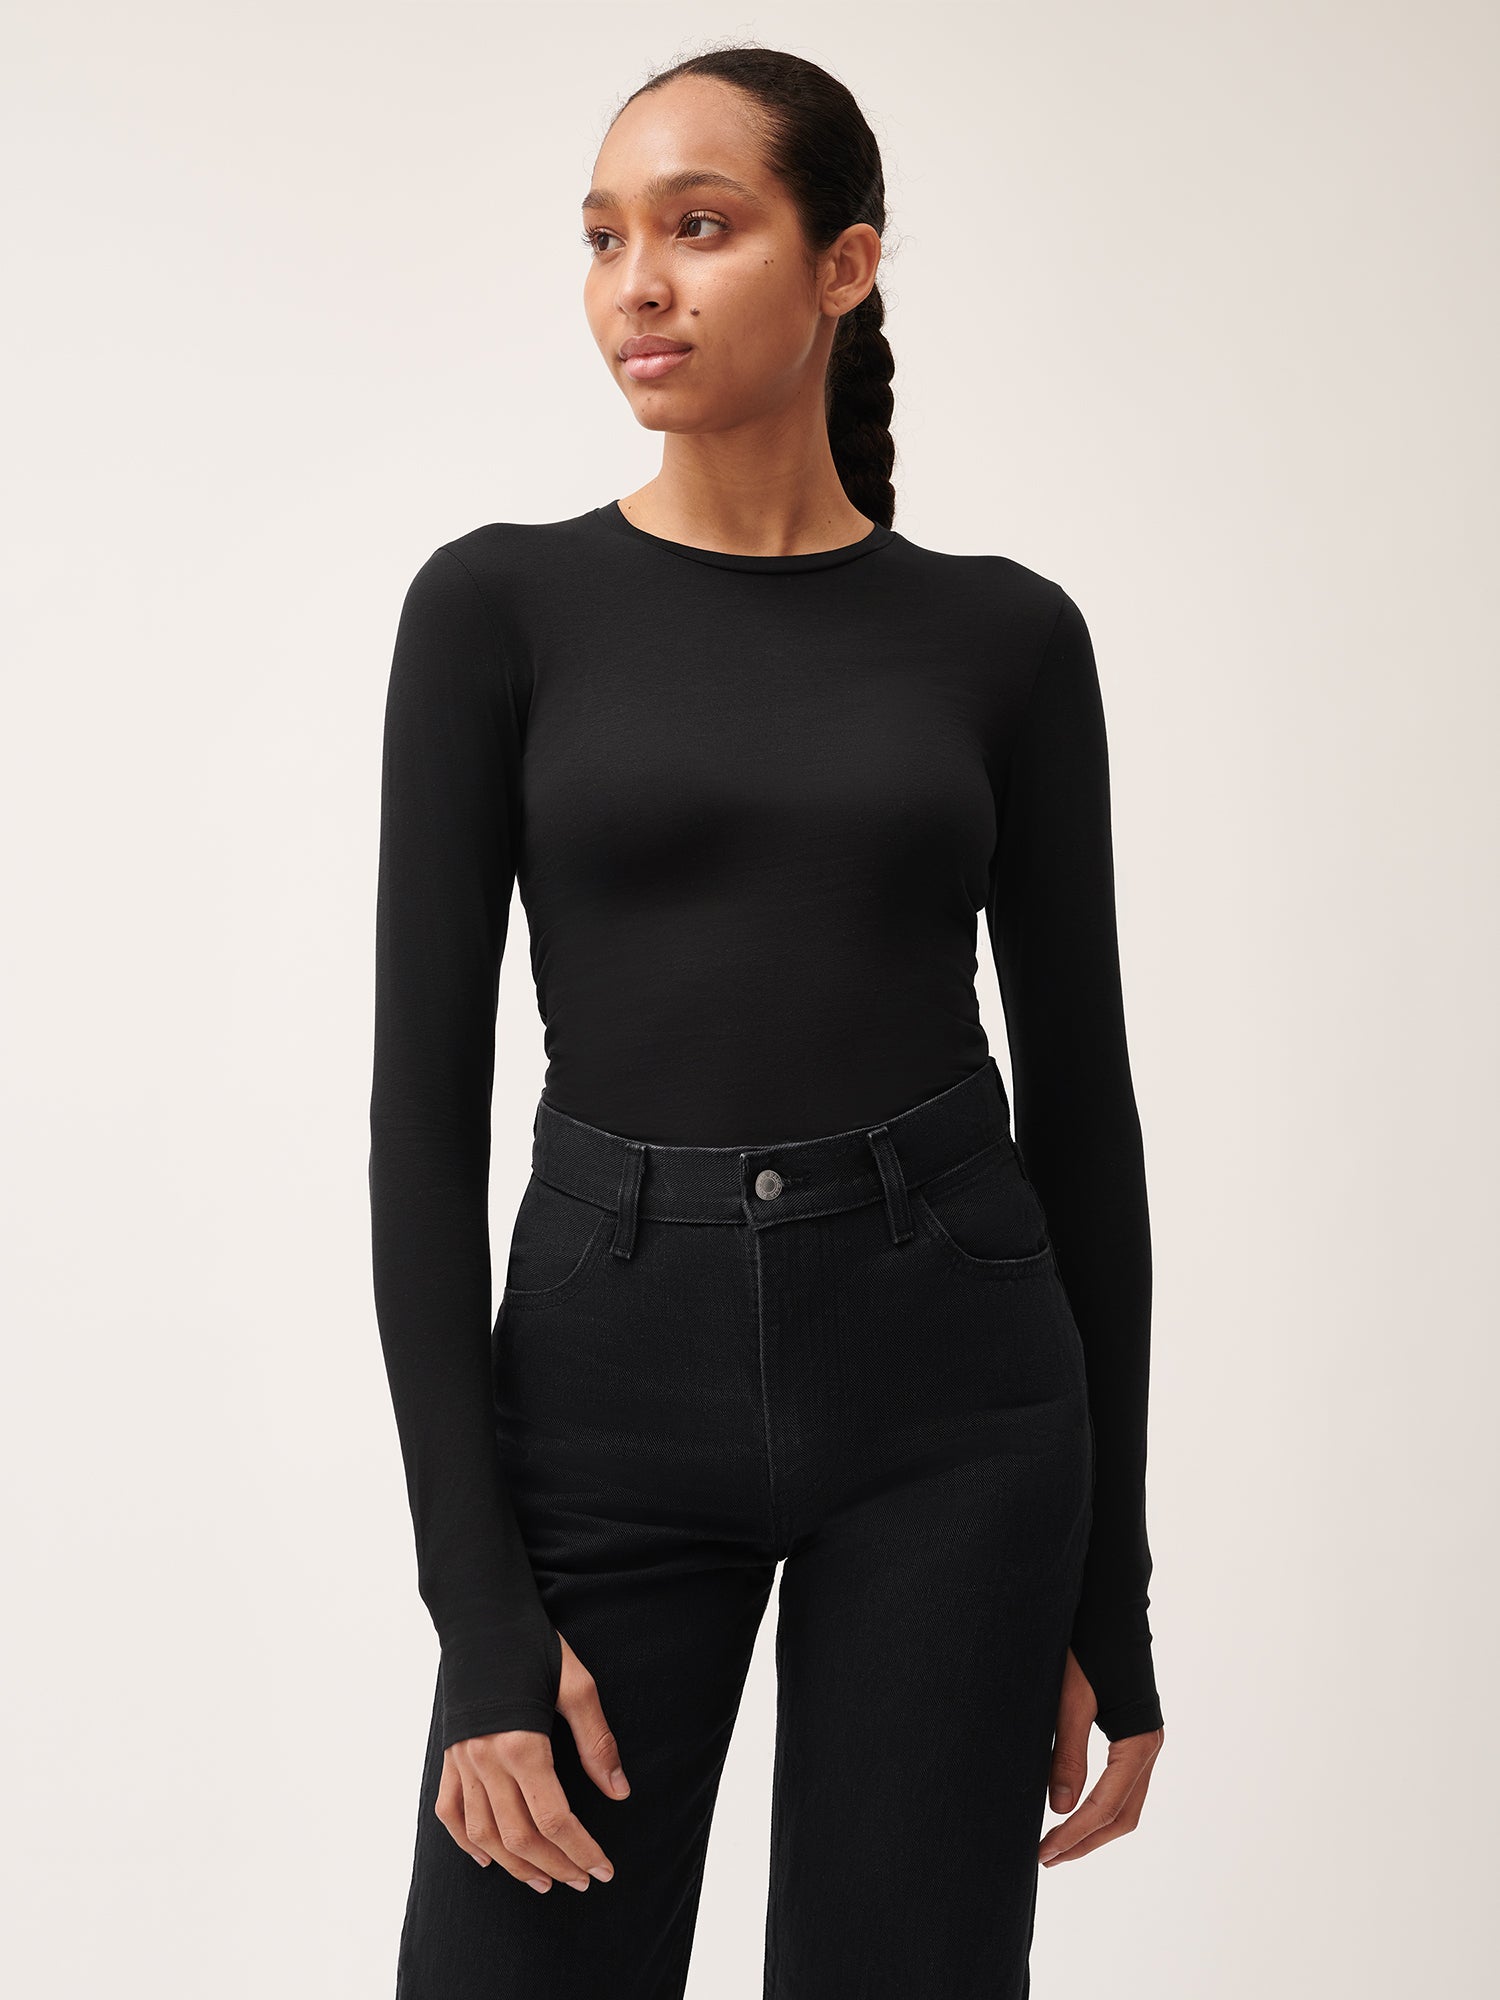 Women_s_365_Cotton_Stretch_Long_Sleeved_Top_Black-female-1